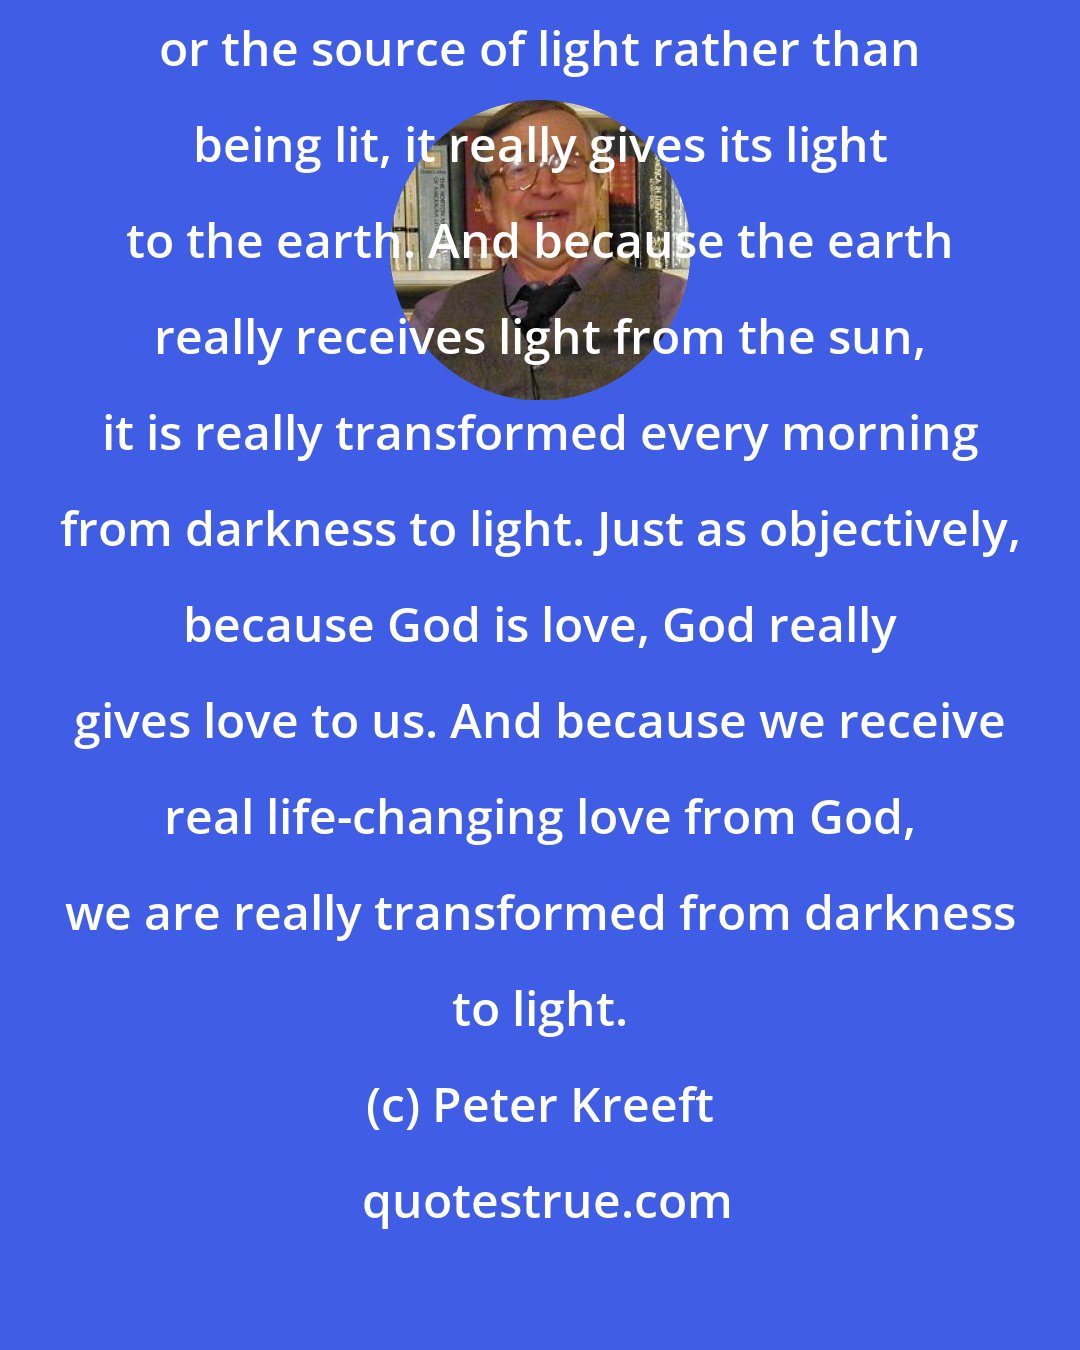 Peter Kreeft: God's love is as objective as light. Because the sun in a sense is light, or the source of light rather than being lit, it really gives its light to the earth. And because the earth really receives light from the sun, it is really transformed every morning from darkness to light. Just as objectively, because God is love, God really gives love to us. And because we receive real life-changing love from God, we are really transformed from darkness to light.